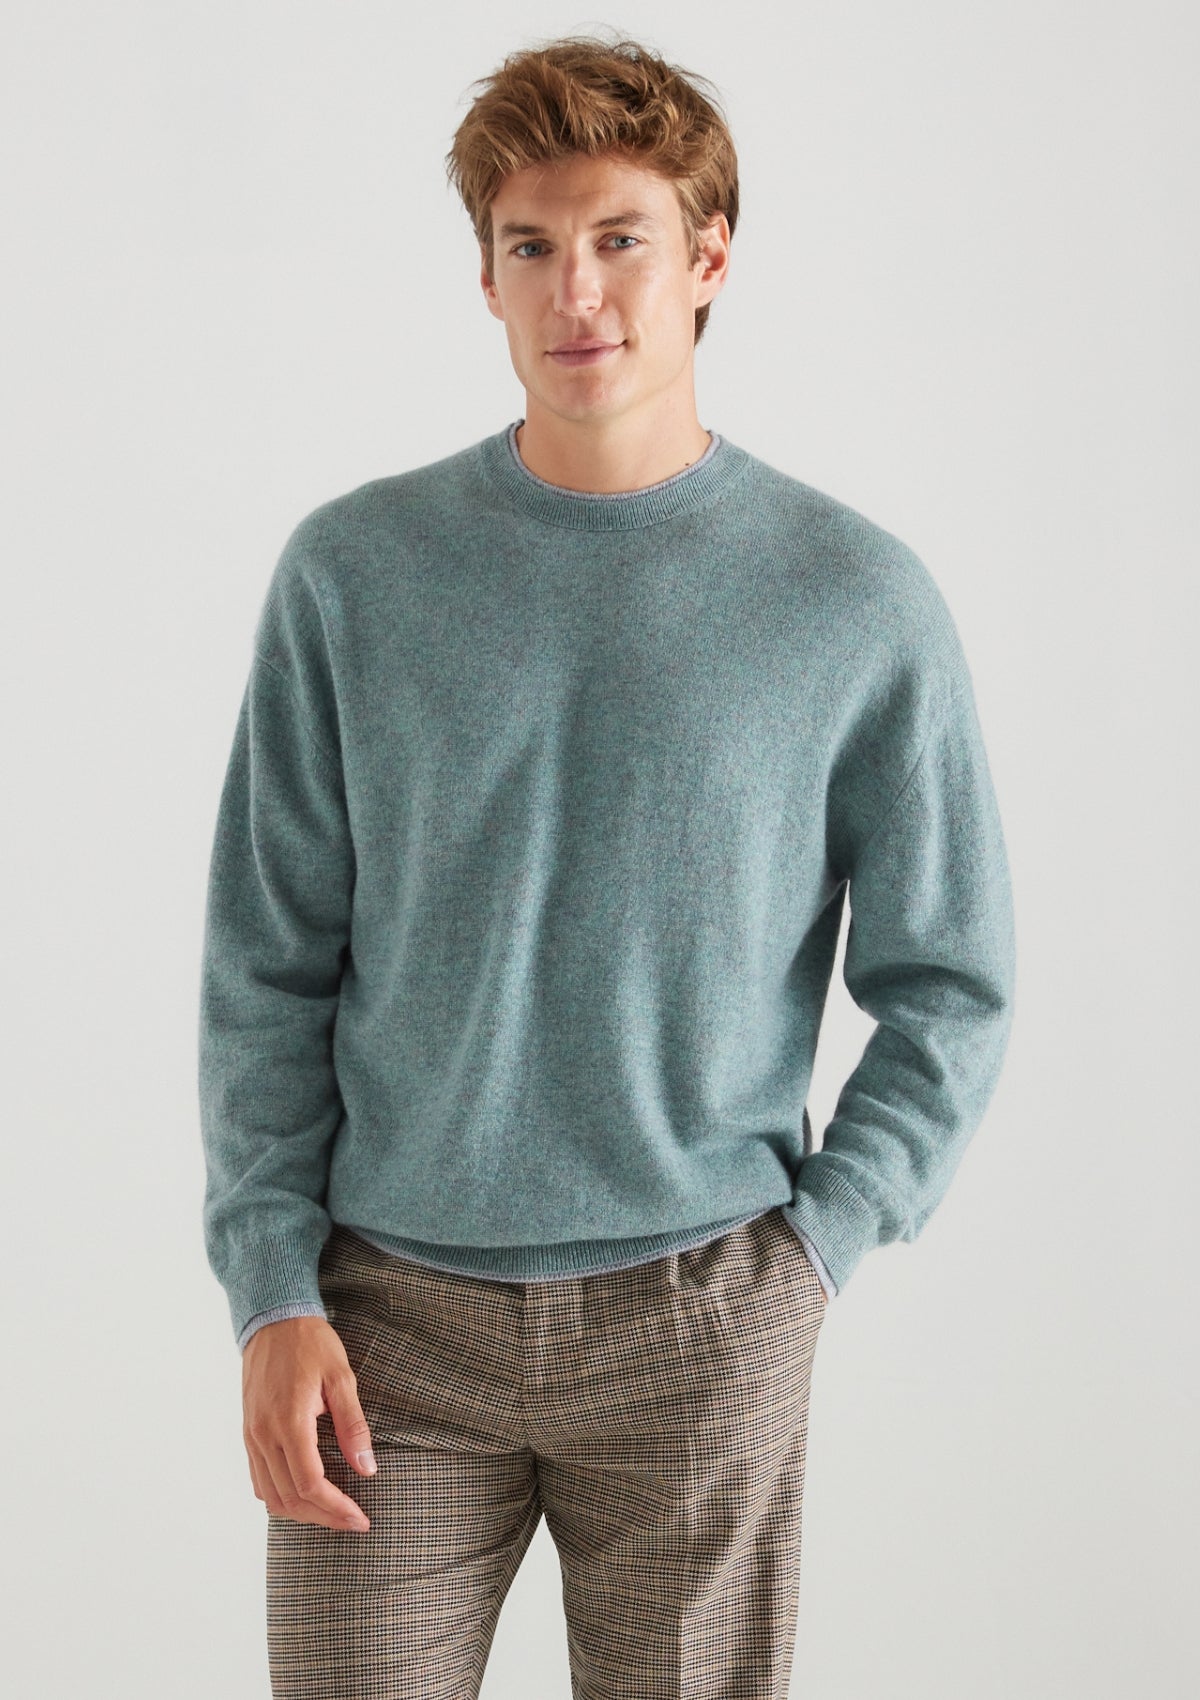 Mens Cashmere Crew Neck Sweater in Lagoon Green